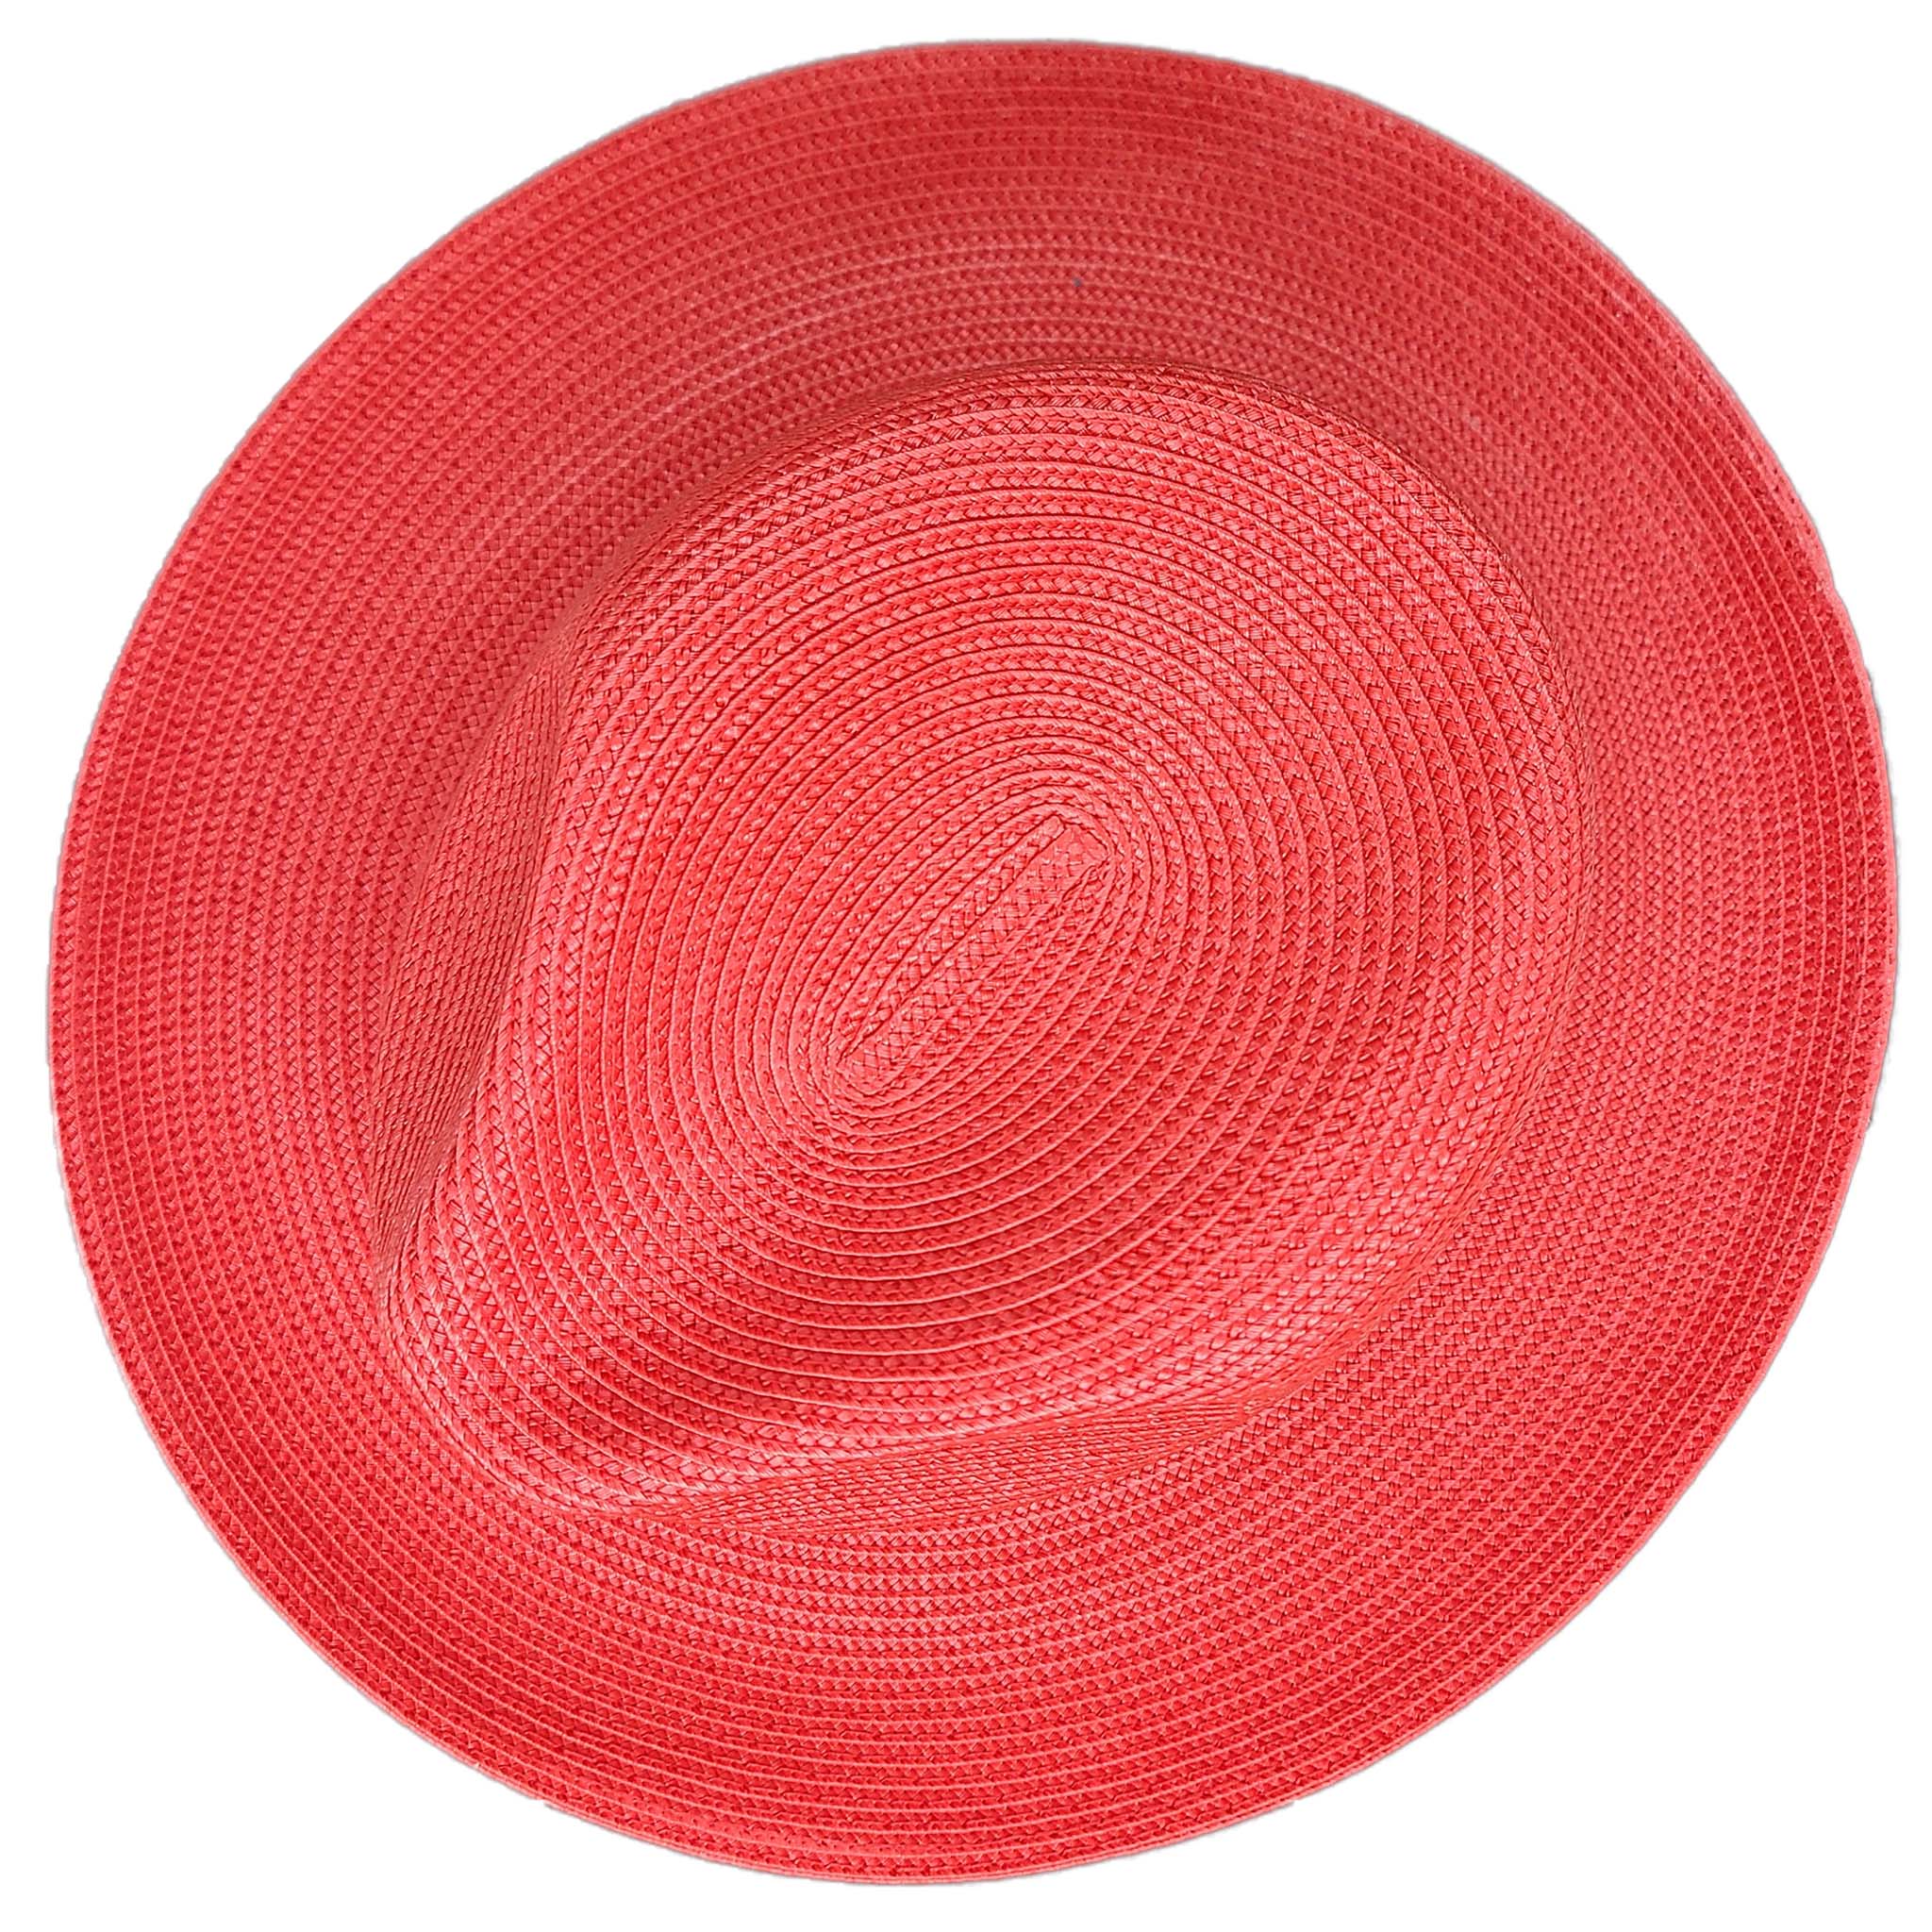 Red Straw Fedora Hat - Top View